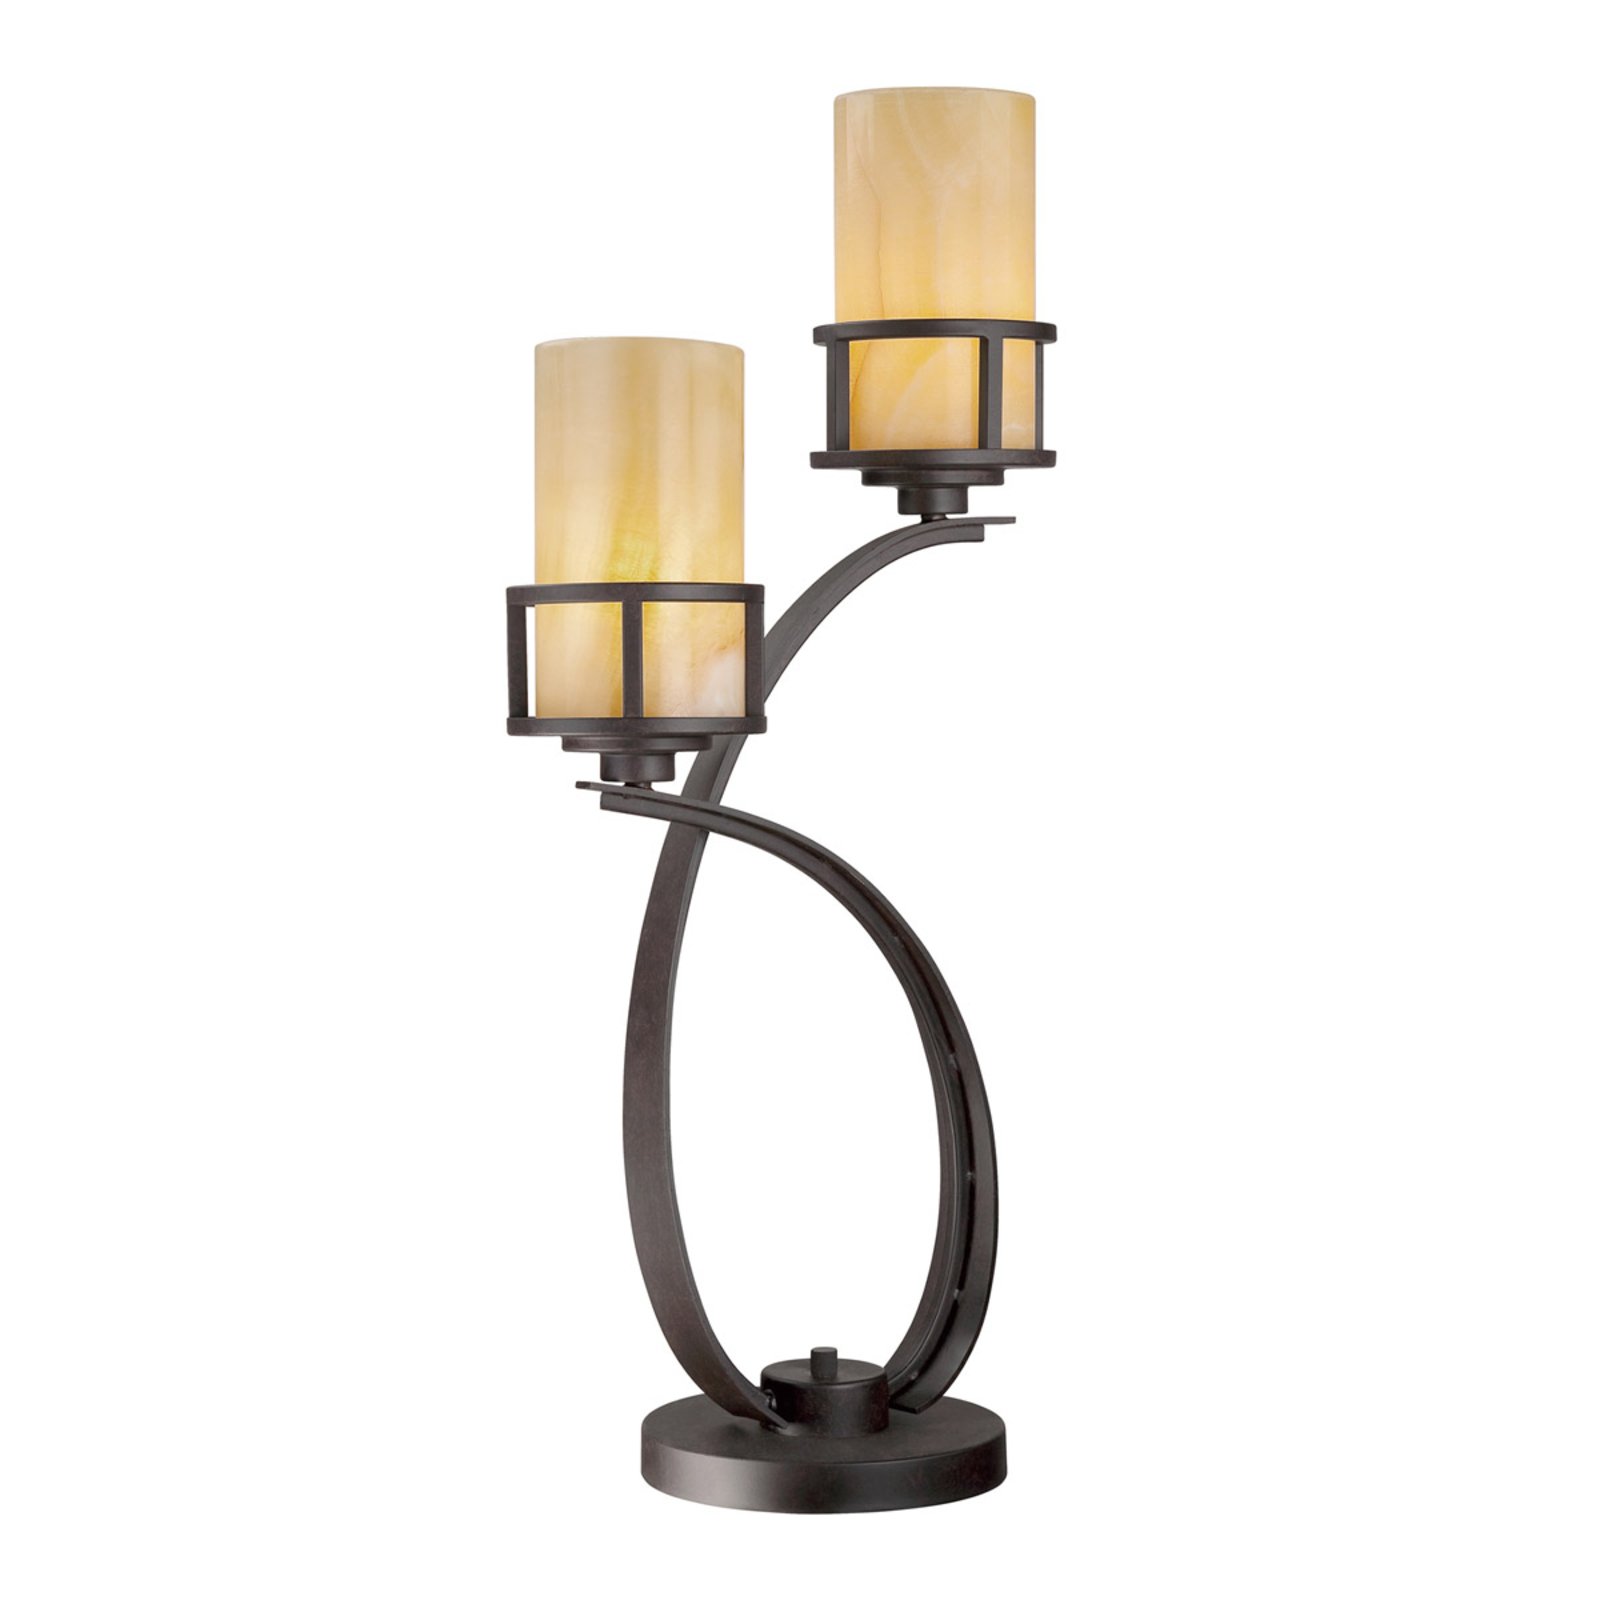 With onyx lampshades - table lamp Kyle